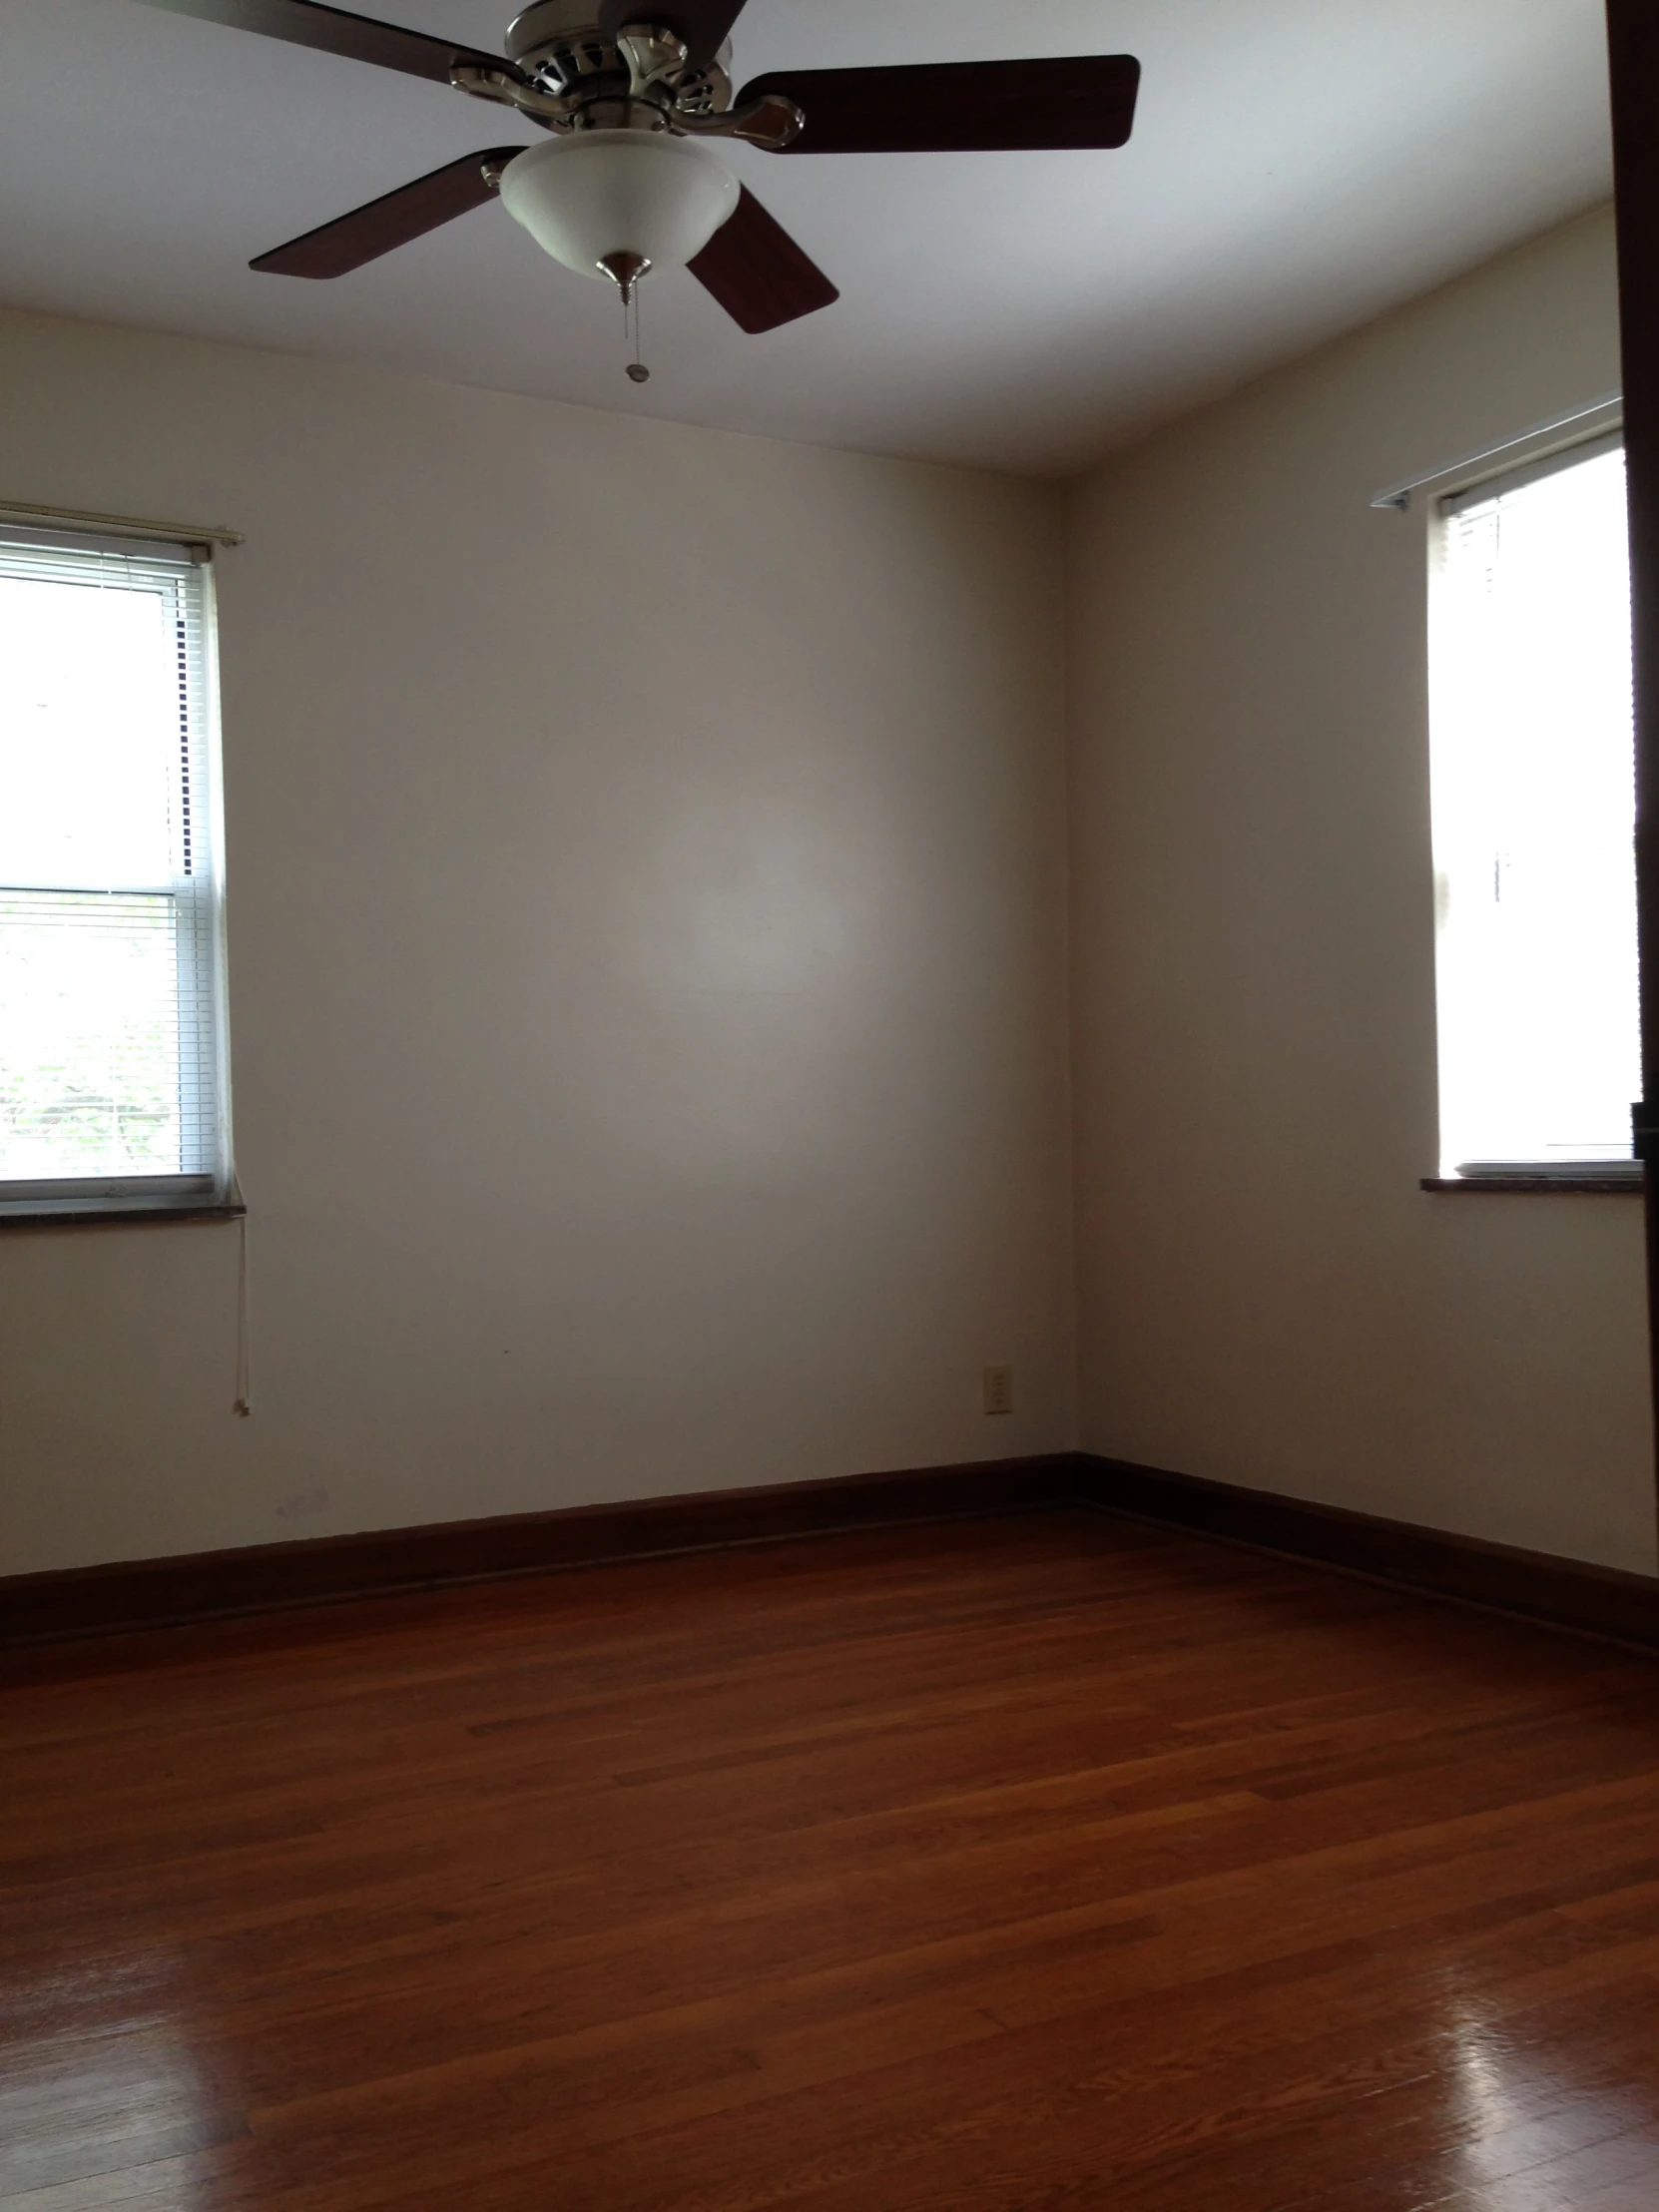 an empty room with wooden floors and ceiling fan